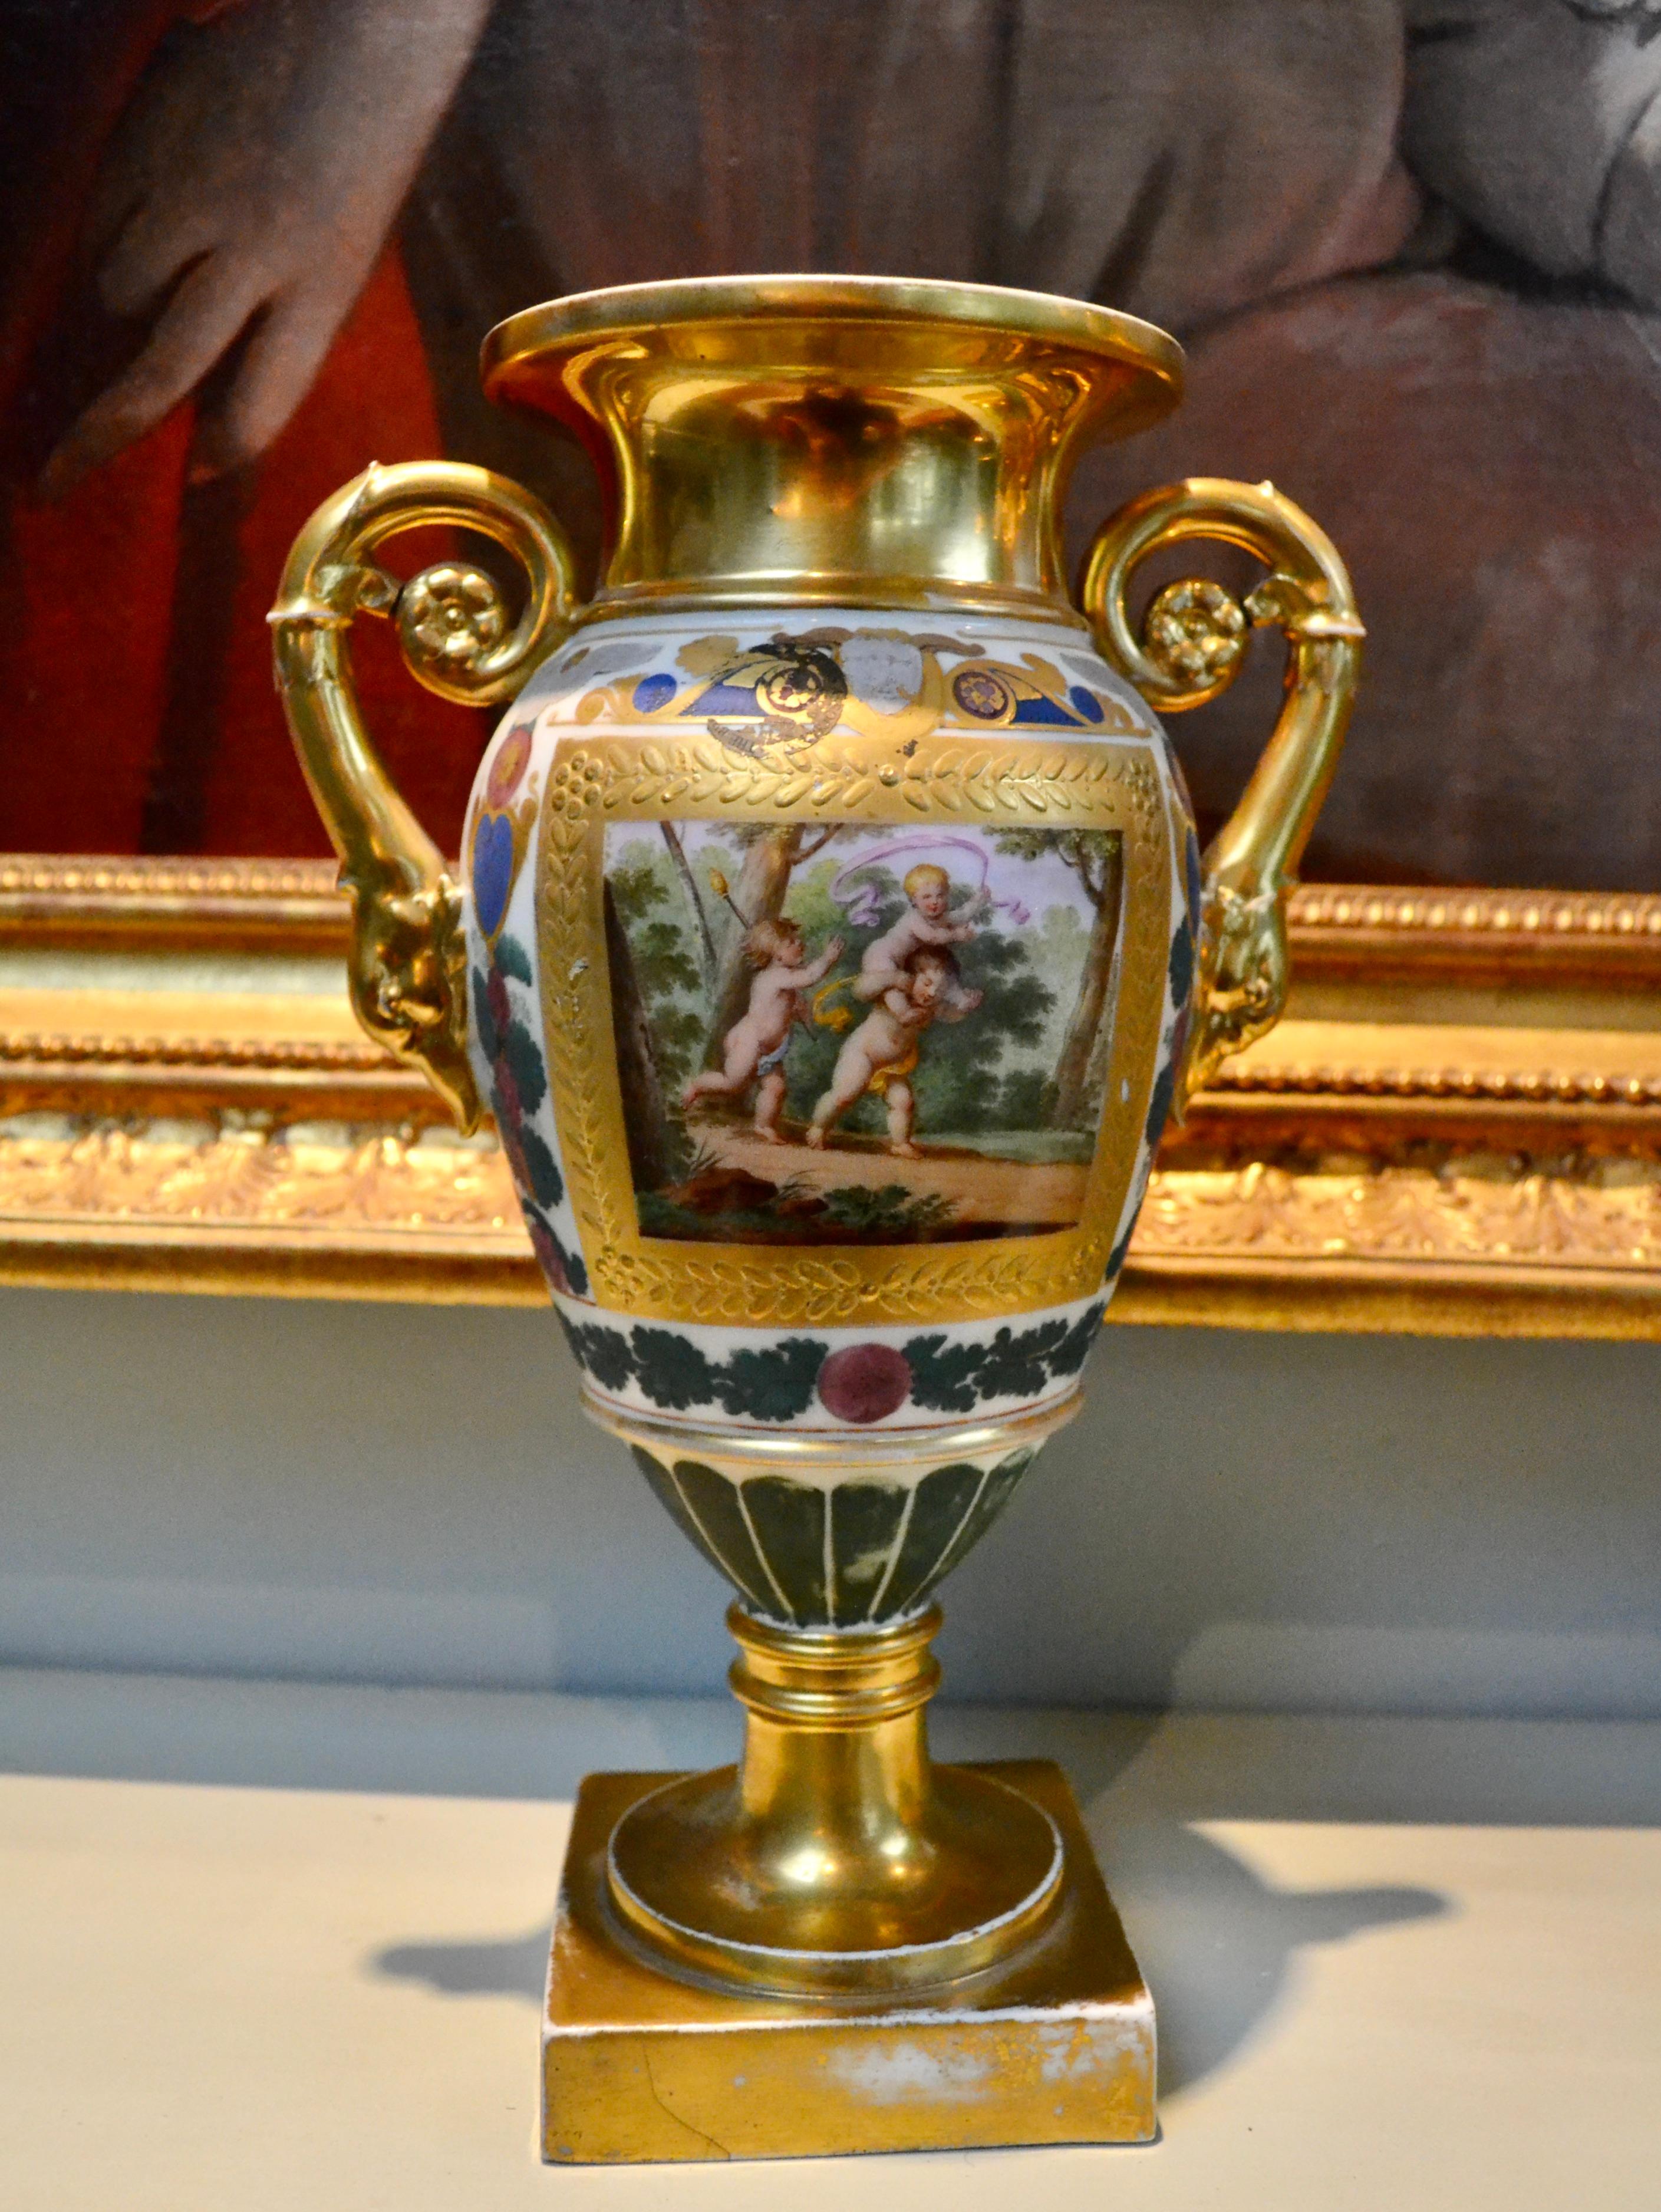 Early 19th Century Paris Porcelain Vase In Good Condition For Sale In Vancouver, British Columbia